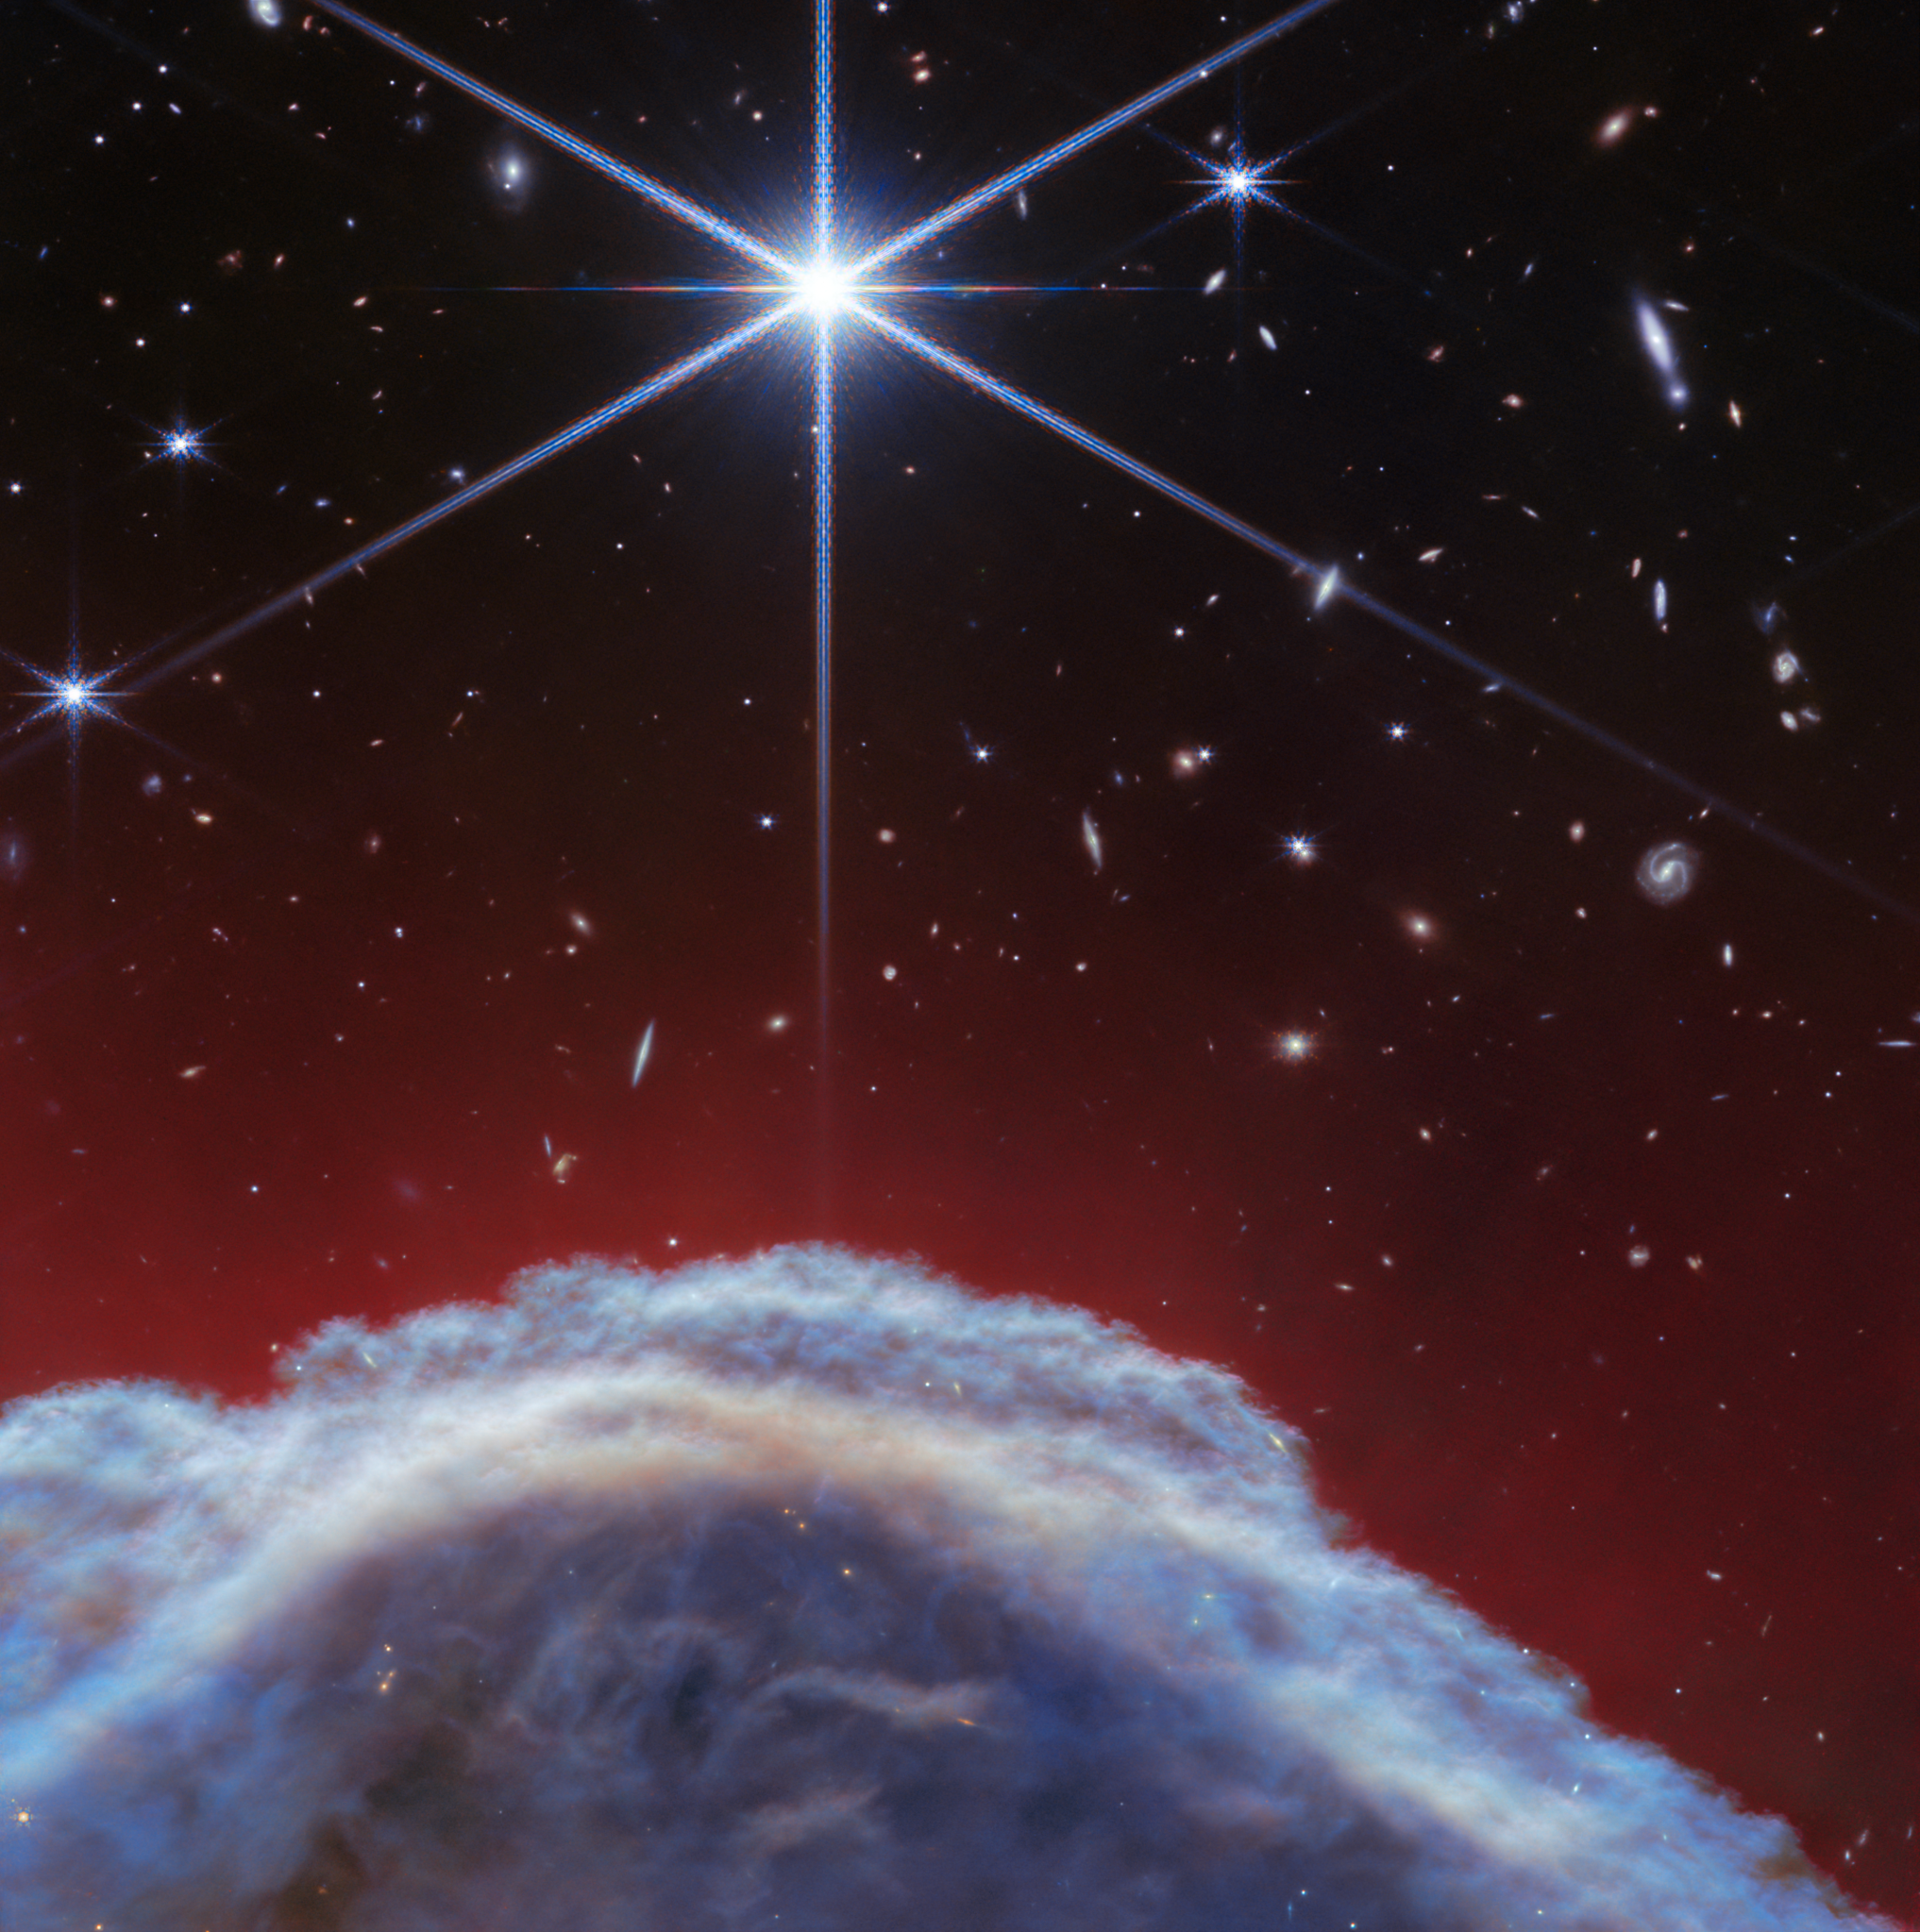 A clumpy dome of blueish-gray clouds rises about a third of the way from the bottom. Above it, streaky, translucent red wisps brush upward to about halfway up the image. The top half of the image is the black background of space with one prominent, bright white star with Webb’s 8-point diffraction spikes. Additional stars and galaxies are scattered throughout the image, although very few are seen through the thick clouds at bottom, and all are significantly smaller than the largest star.